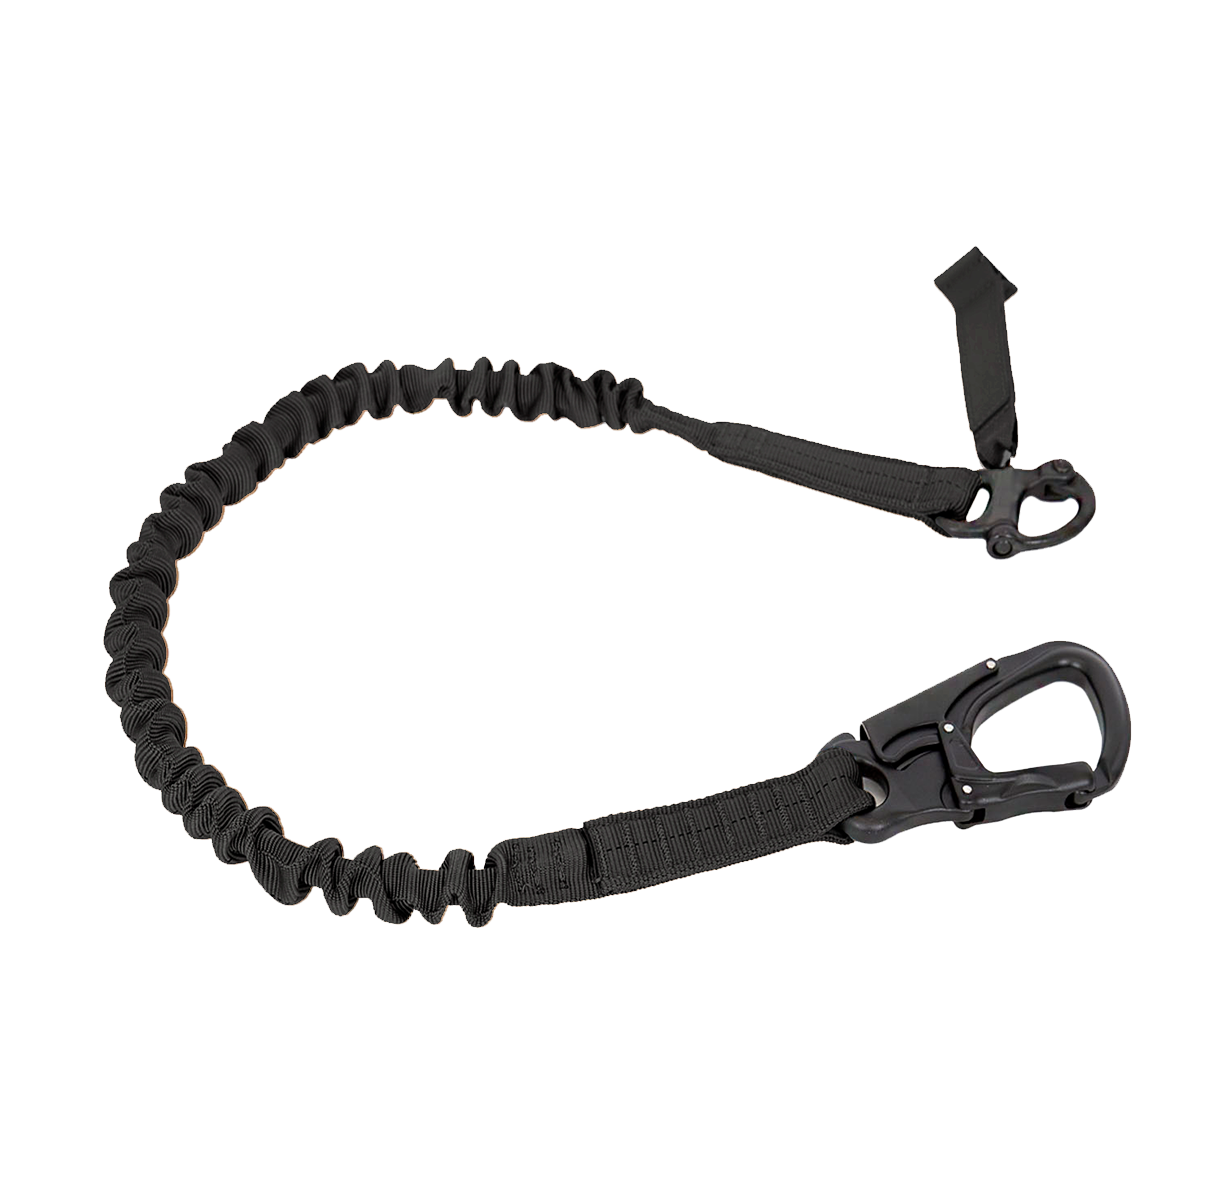 Short Lanyard with Carabiner, Embroidered patches manufacturer